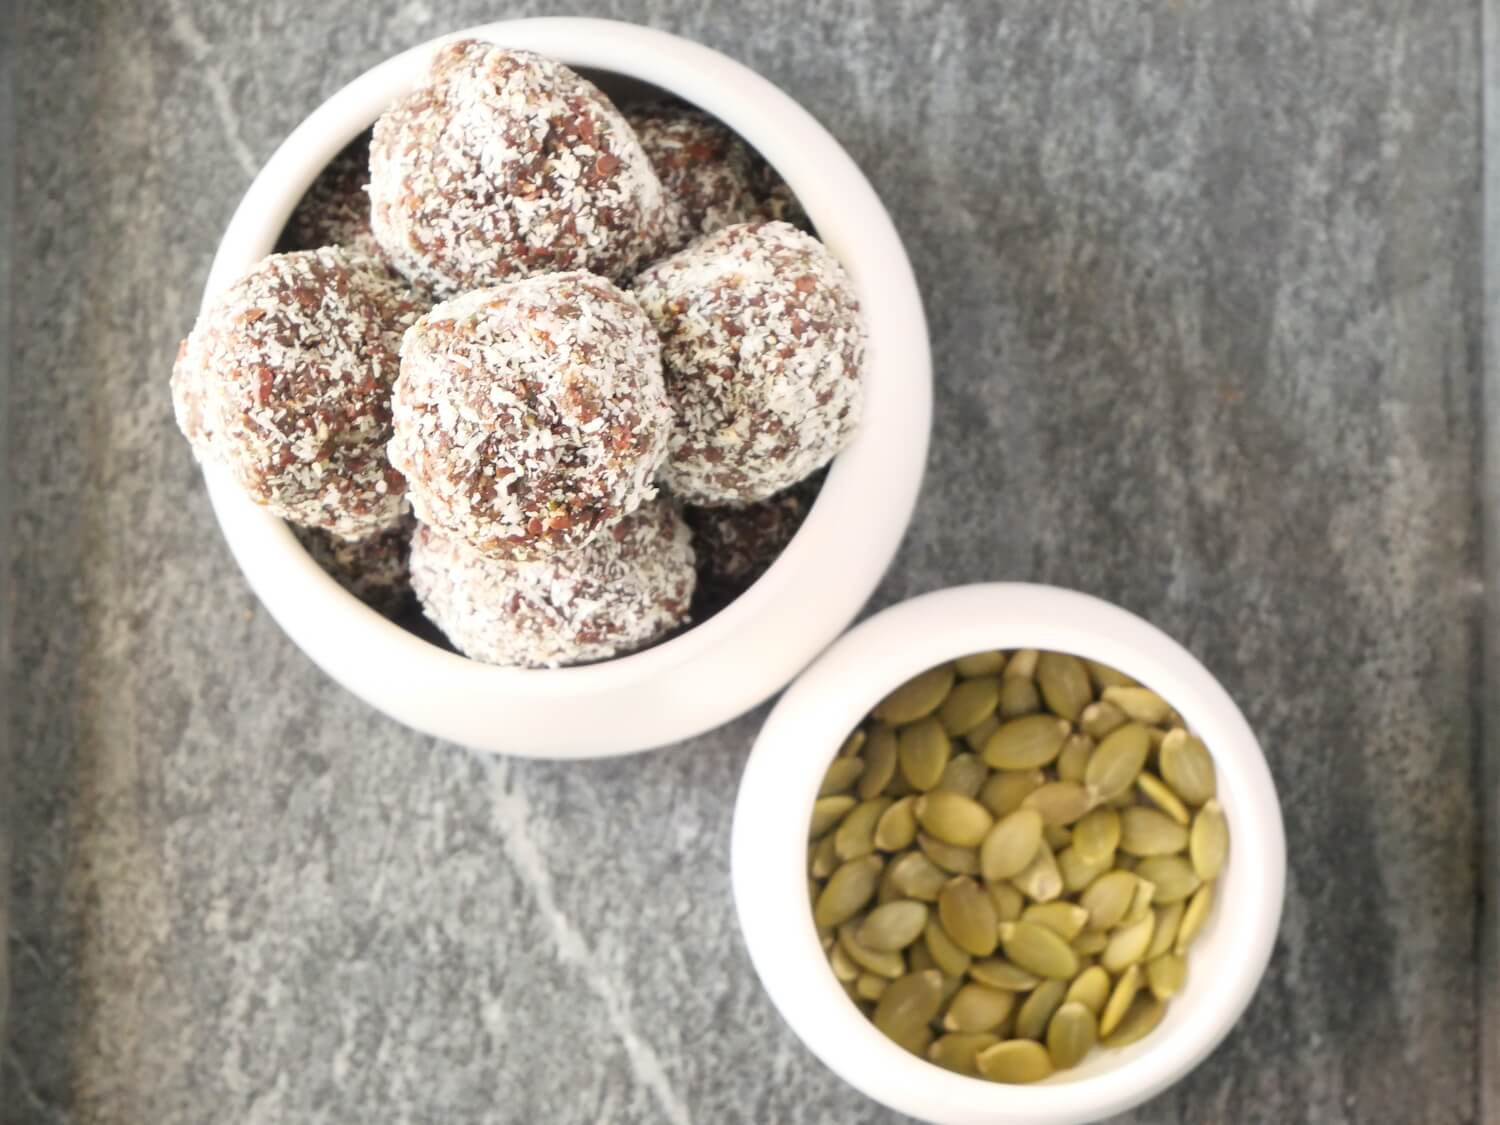 Two white bowls on a kitchen bench. The first bowl is full of chocolate seed cycle bliss balls. The second bowl is filled with pumpkin seeds.